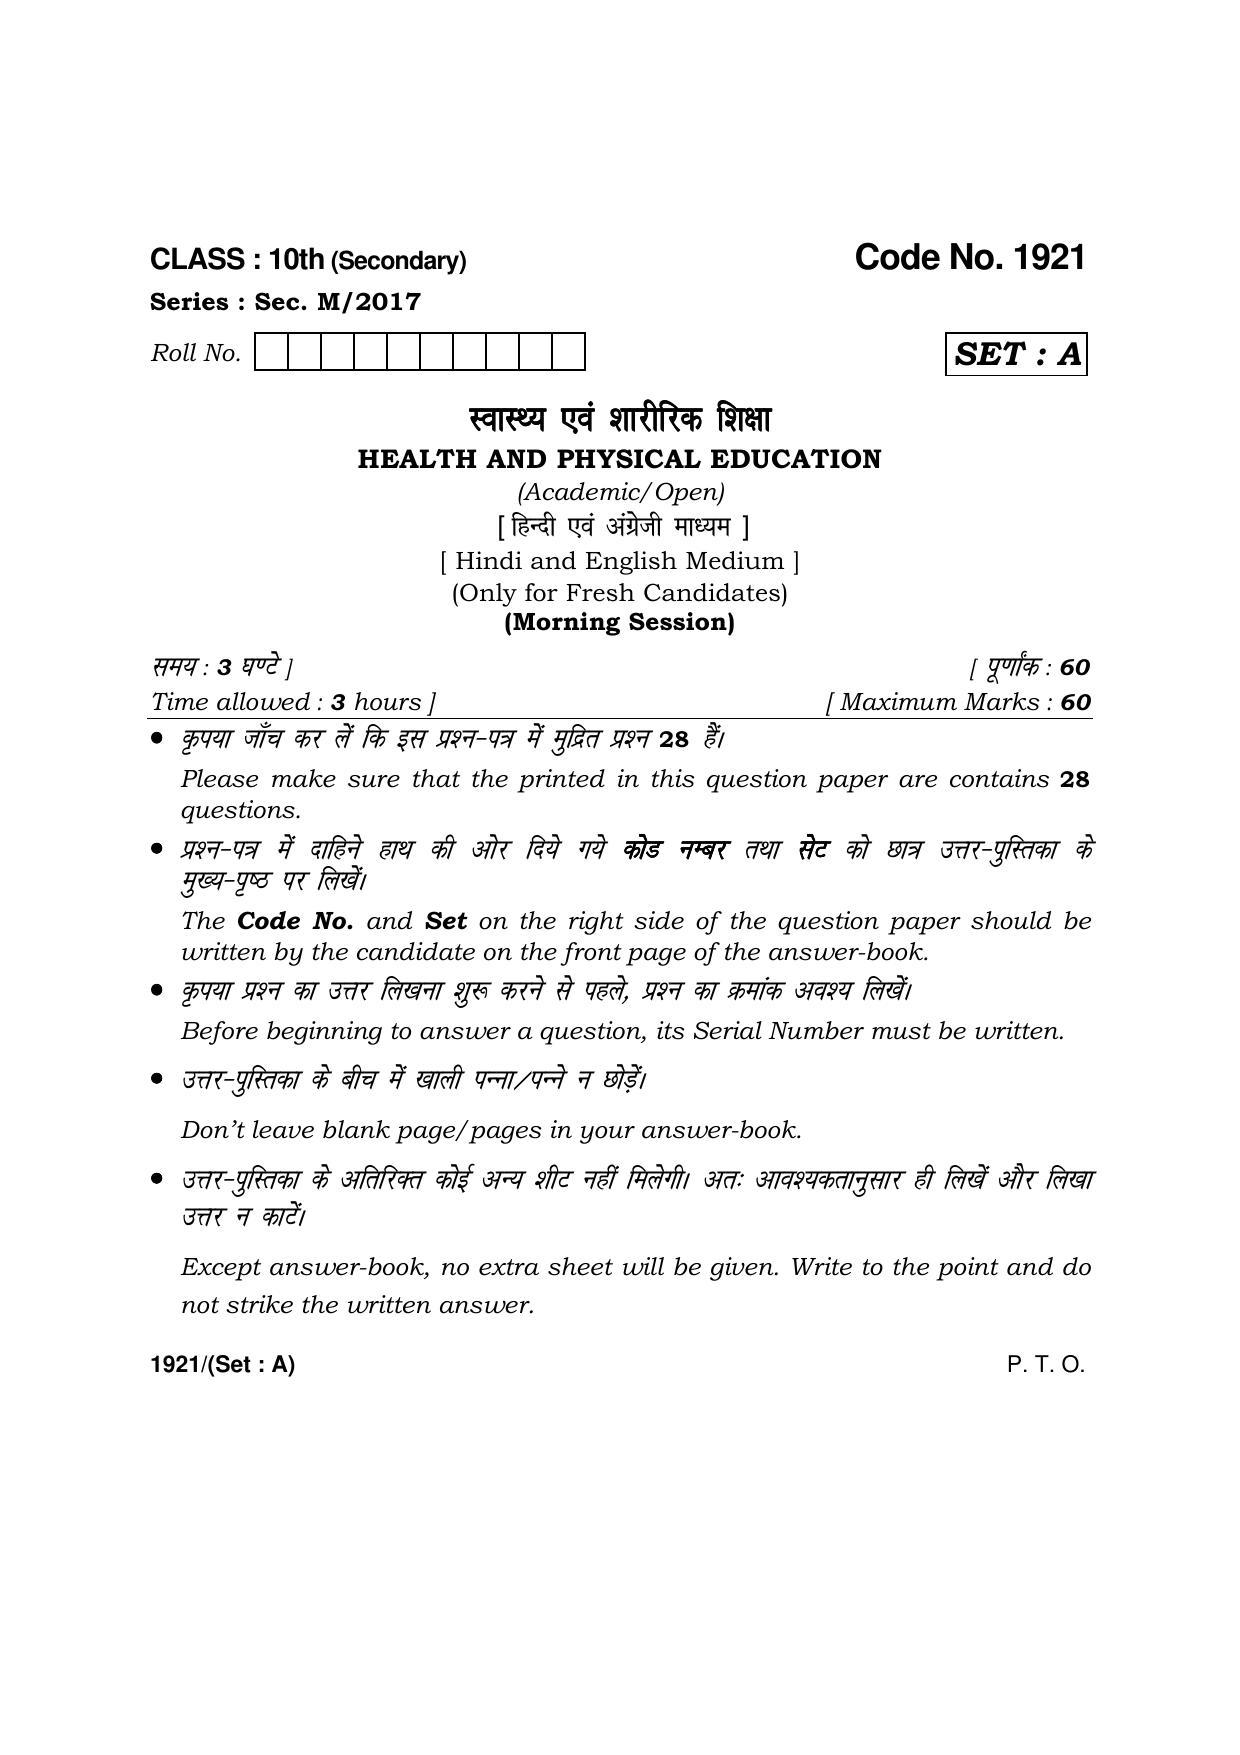 Haryana Board HBSE Class 10 Health & Physical Education -A 2017 Question Paper - Page 1